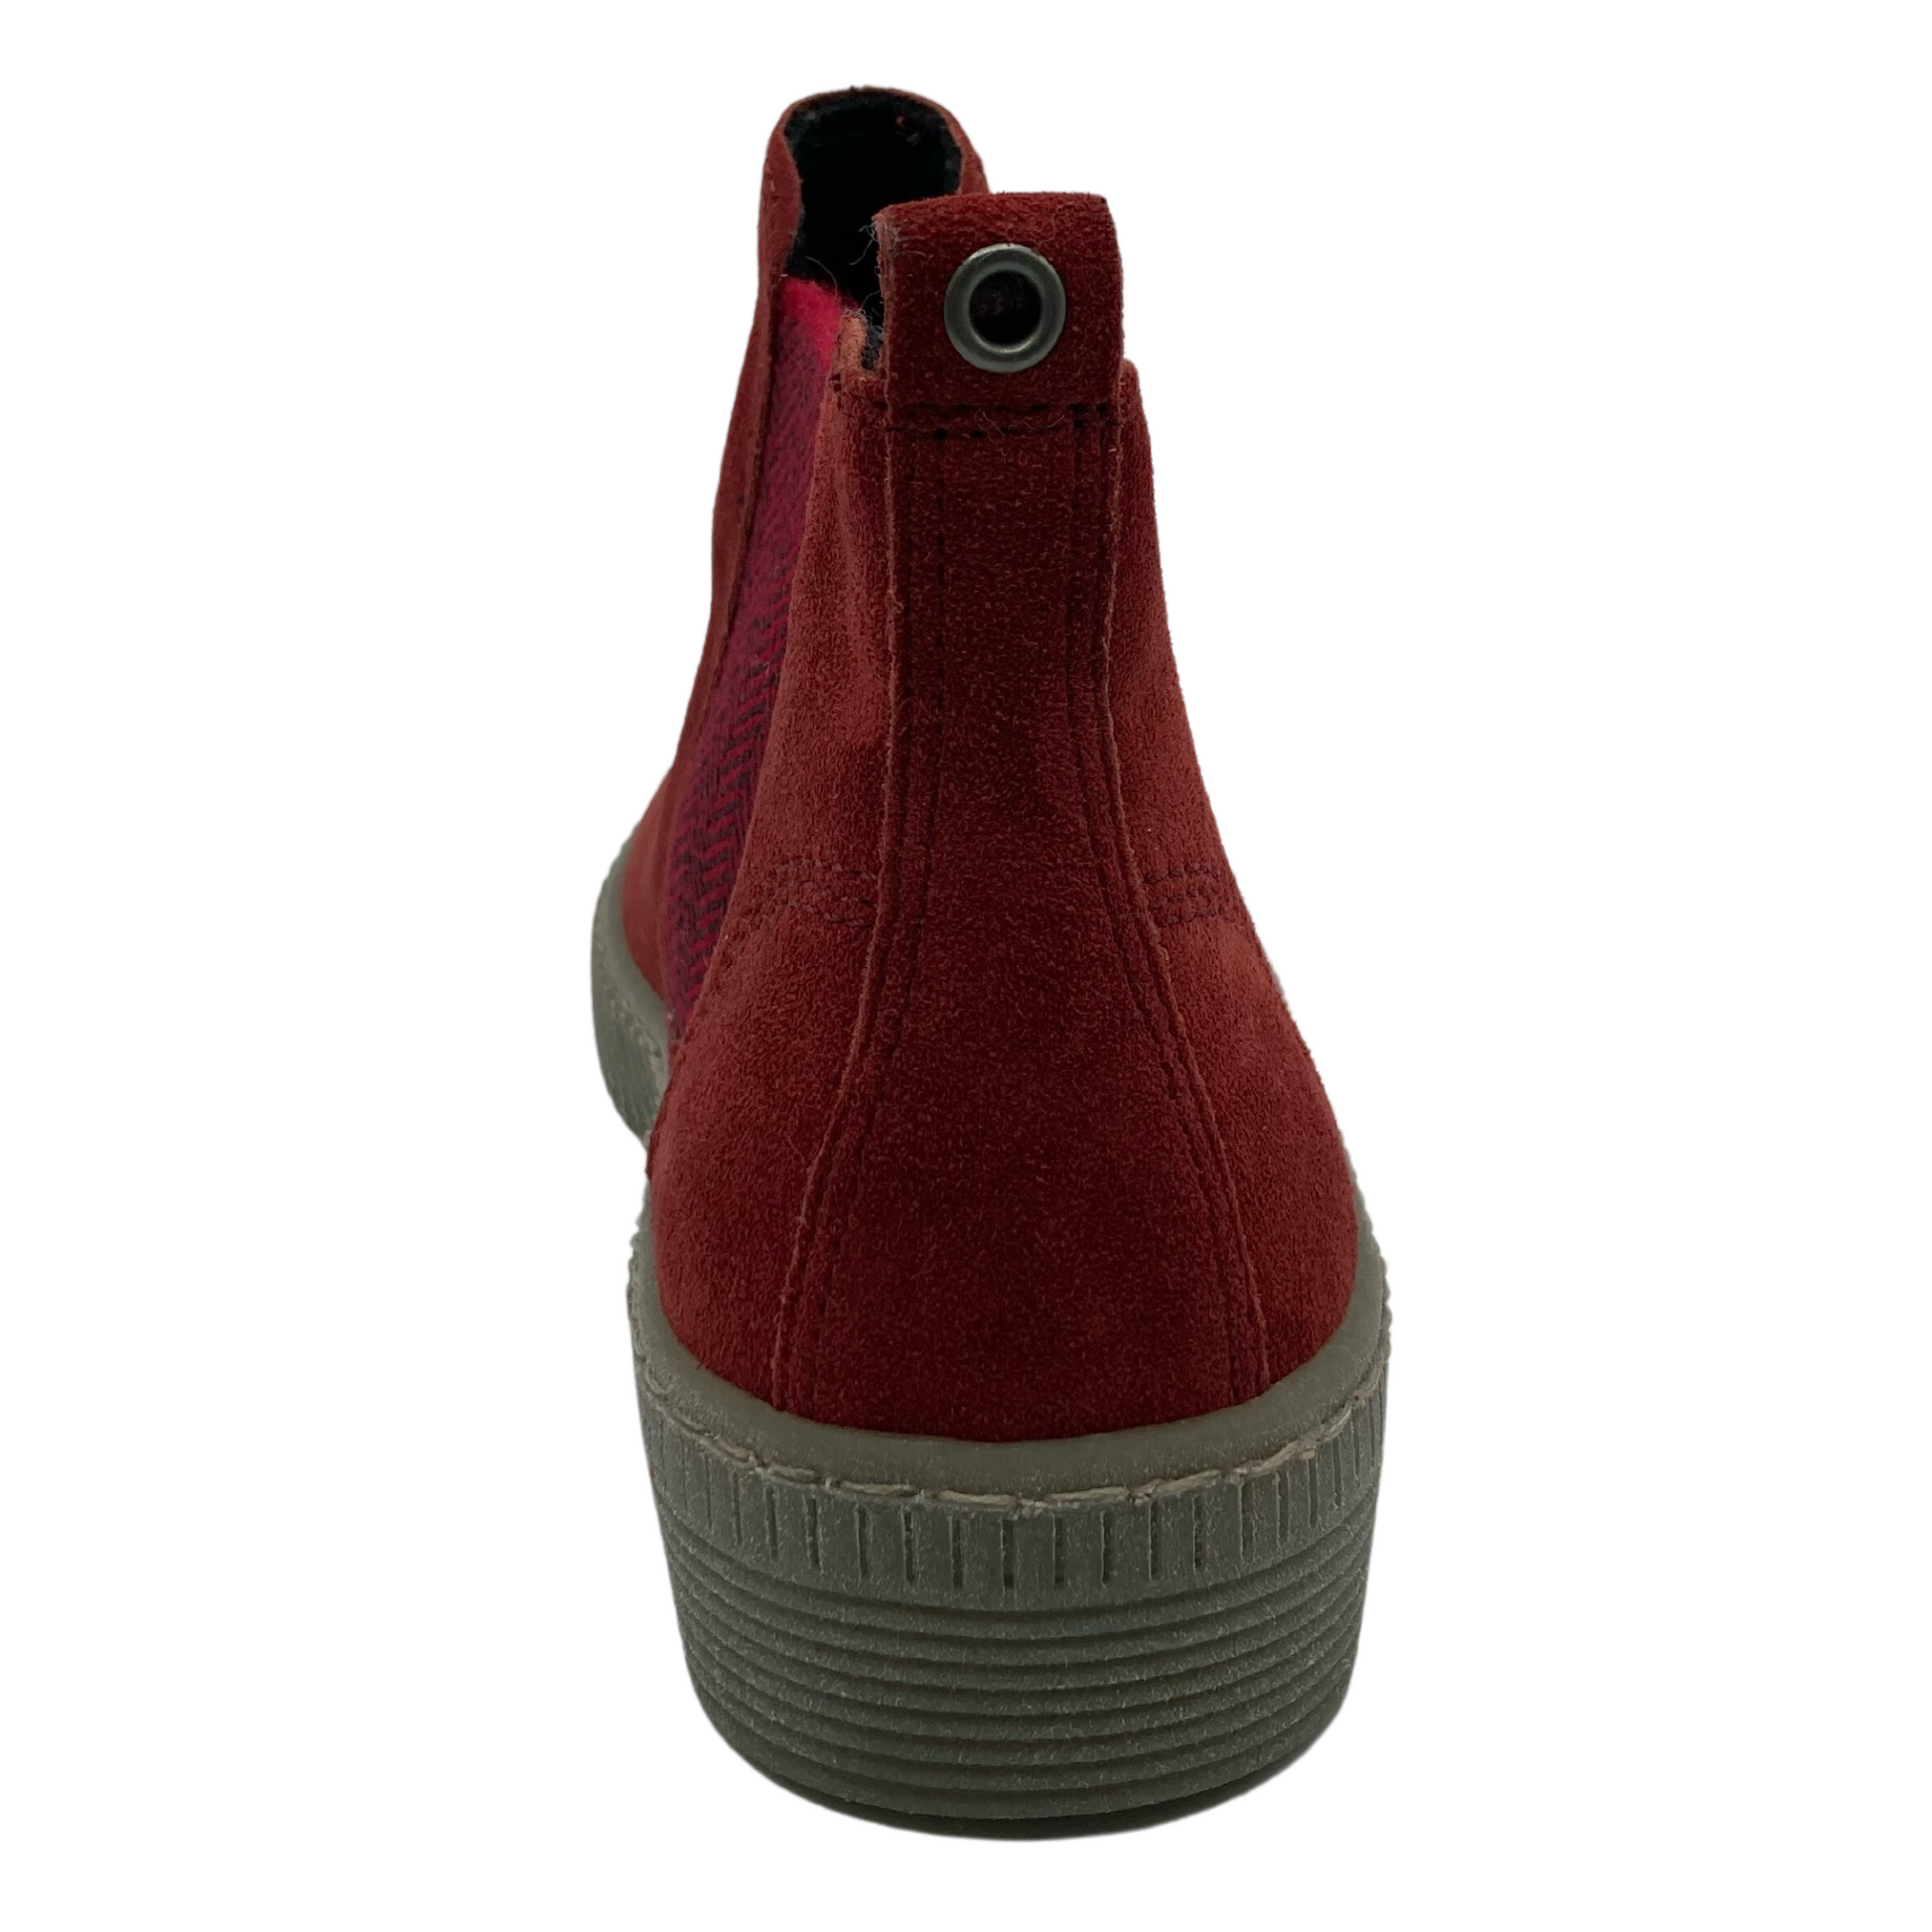 Heel view of red suede bootie with rubber sole and pull tab with a silver grommet